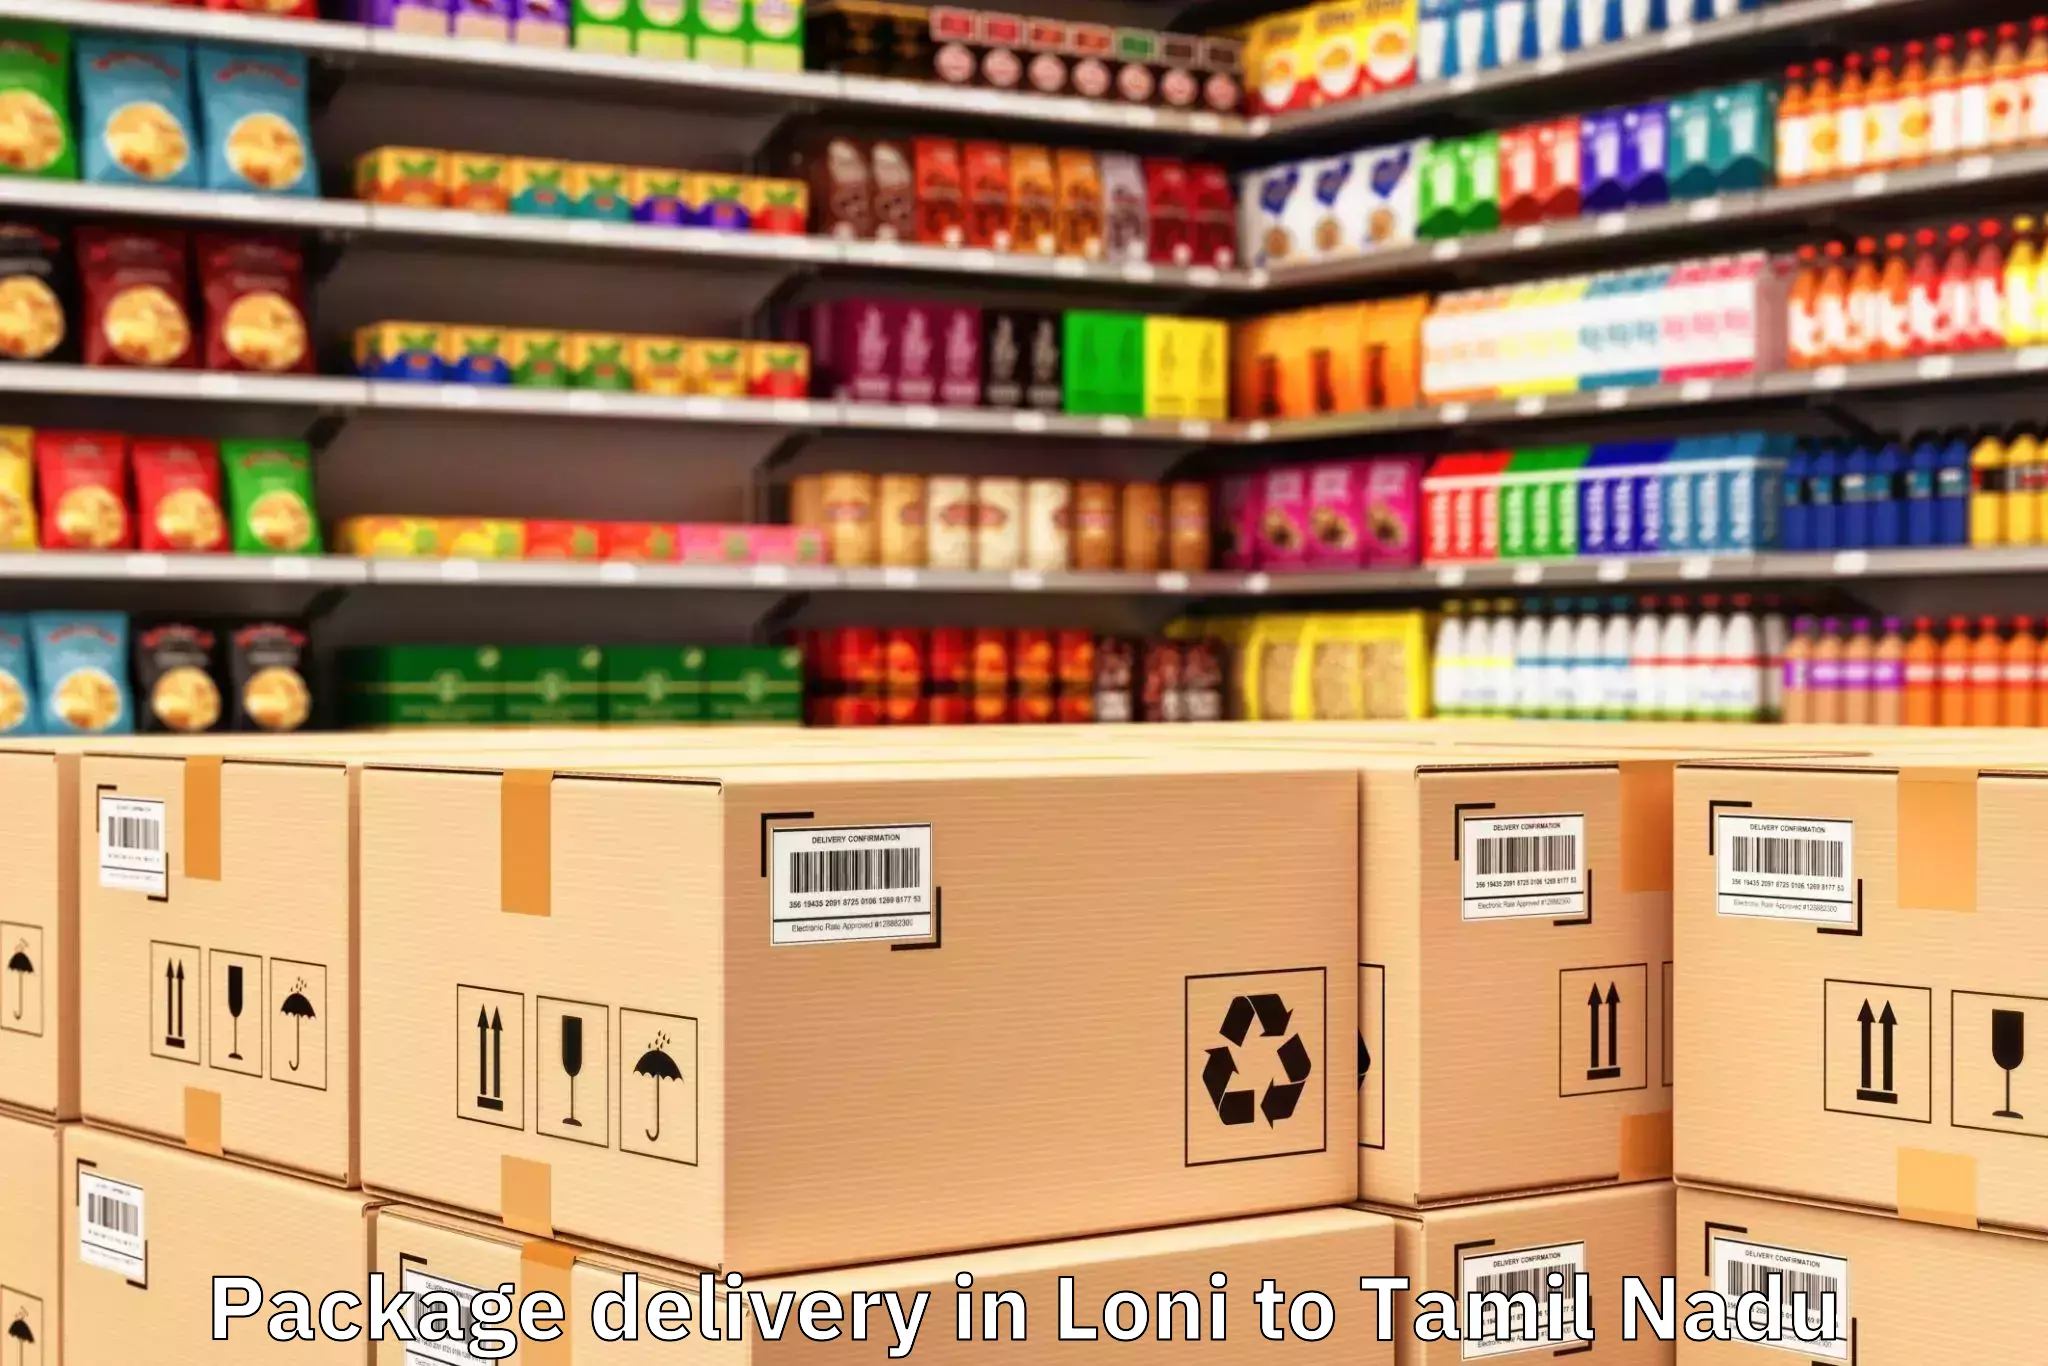 Discover Loni to Aruppukkottai Package Delivery